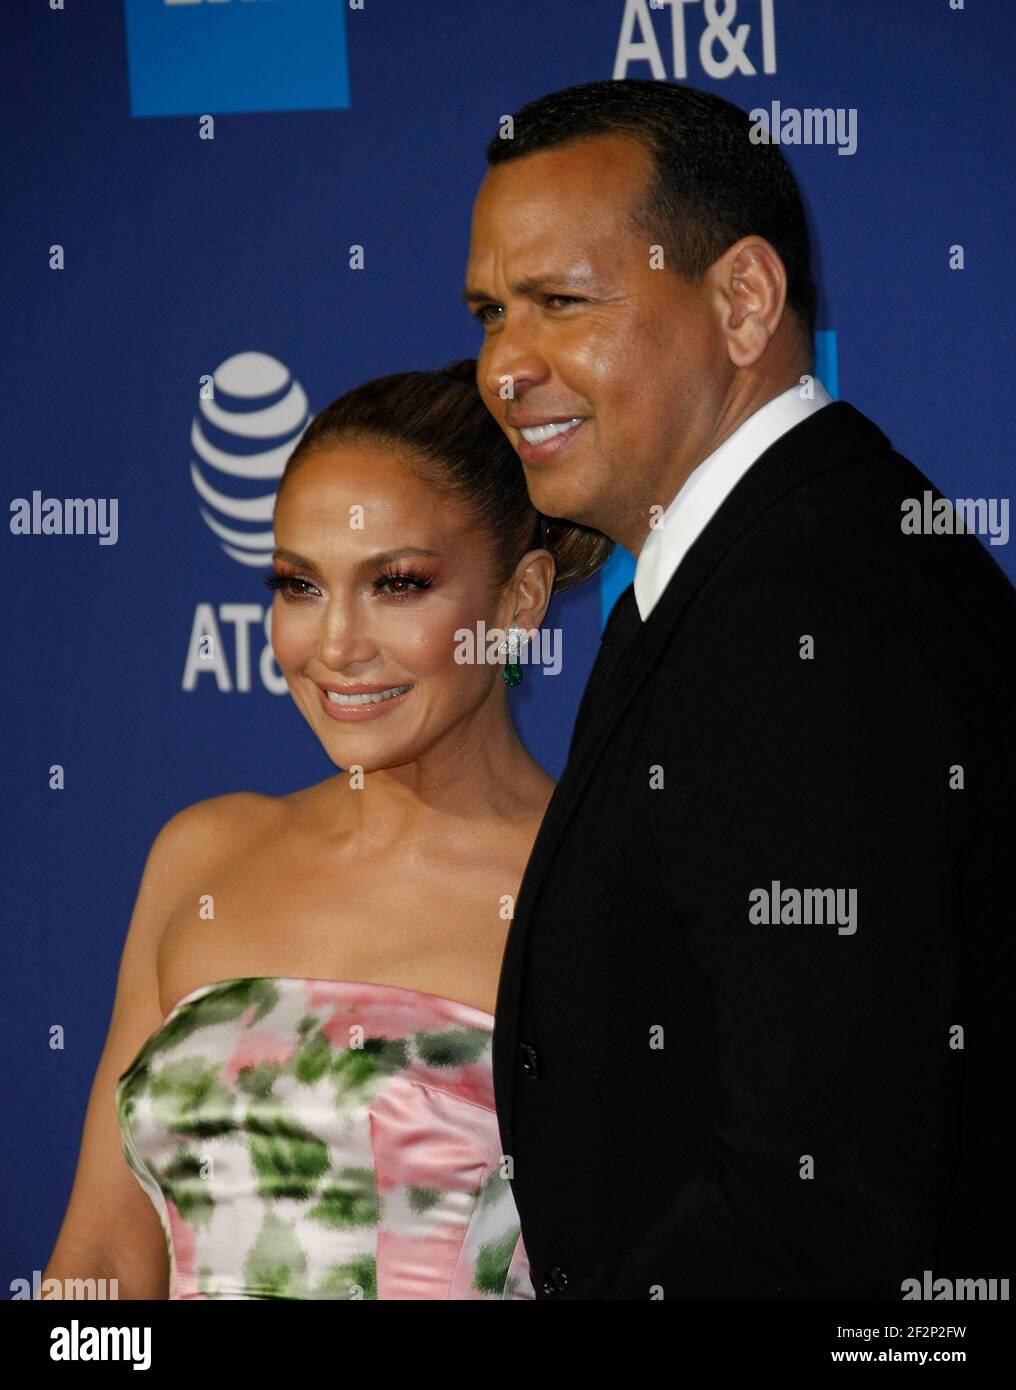 PALM SPRINGS, CALIFORNIA - JANUARY 02: Jennifer Lopez and Alex Rodriguez attends the 31st Annual Palm Springs International Film Festival Film Awards Gala at Palm Springs Convention Center on January 02, 2020 in Palm Springs, California. Photo: CraSH/imageSPACE/MediaPunch Stock Photo